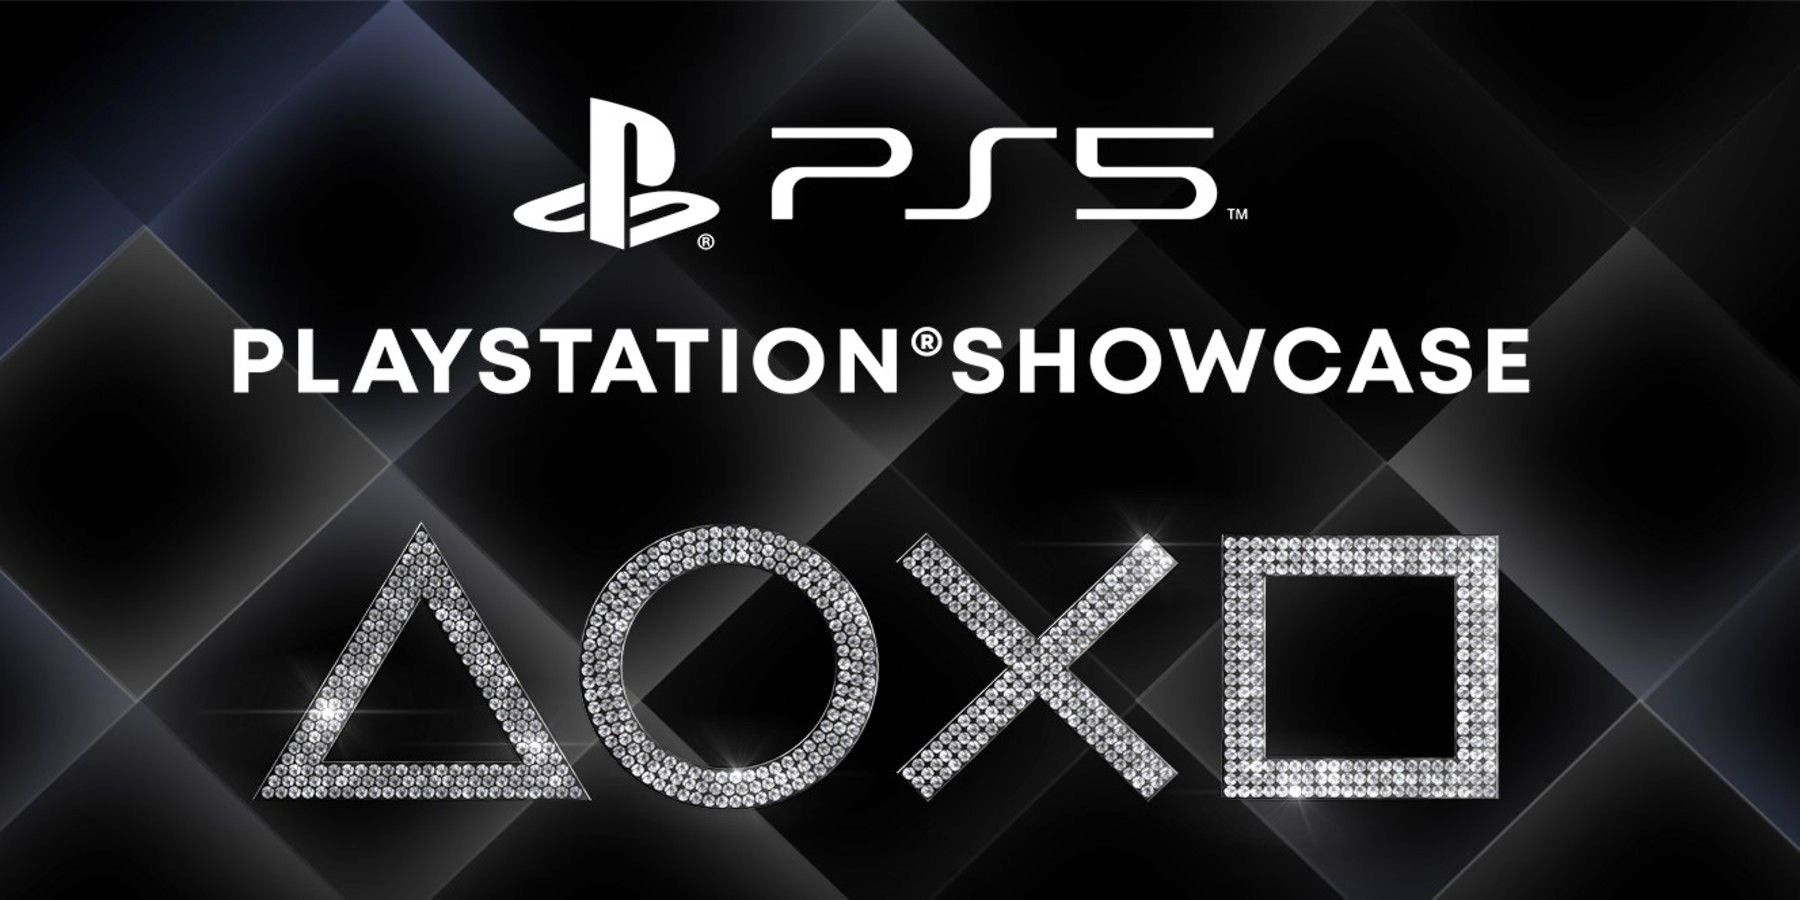 Sources: A big PlayStation Showcase is weeks away